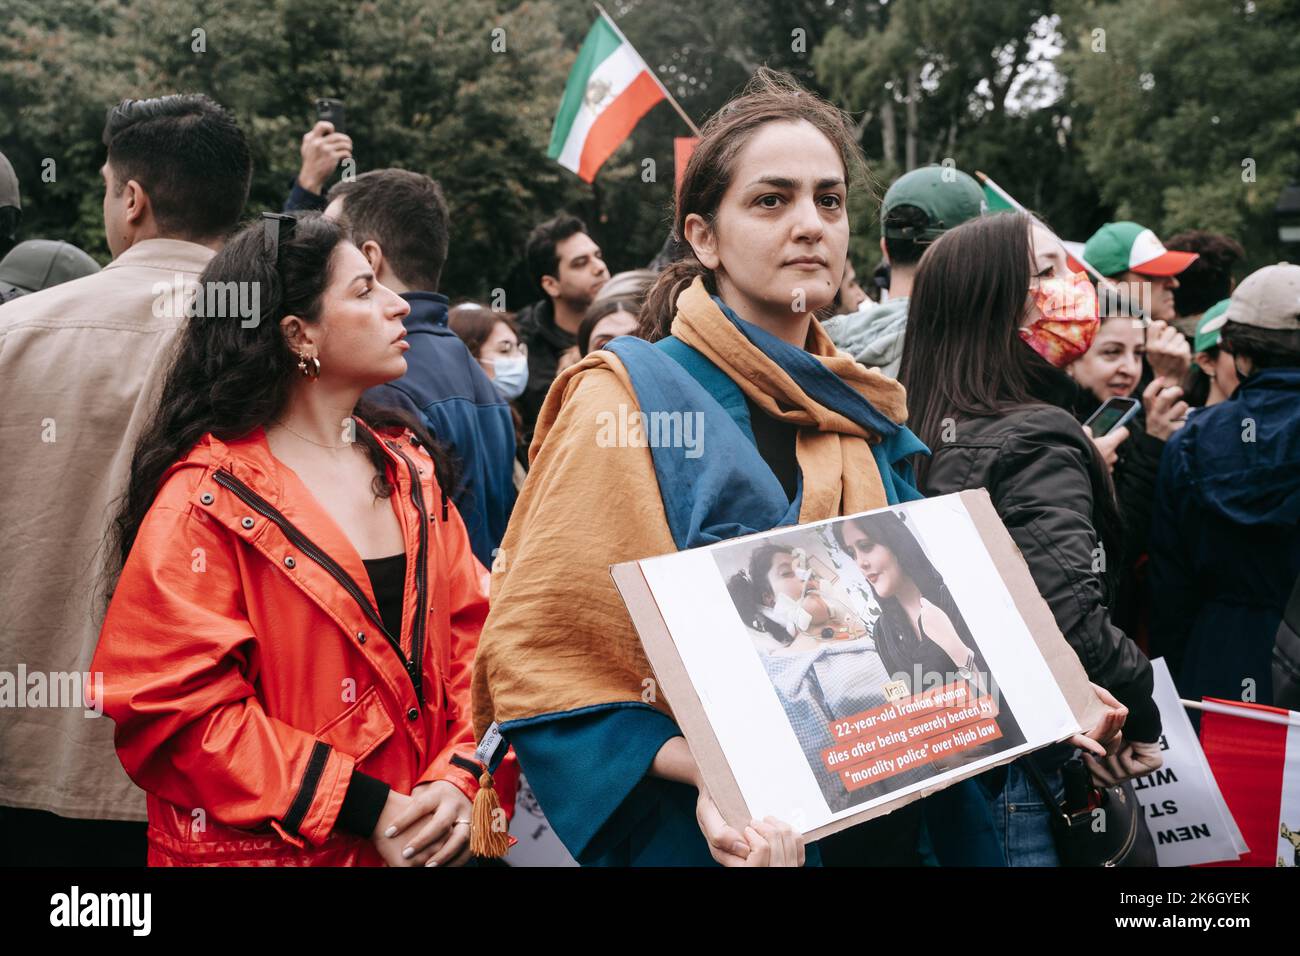 New York, United States. 01st Oct, 2022. A woman holds a protest sign dispalying two photos of Mahsa Ahmini side by side. In one photo, Mahsa Ahmini is smiling. In the other, she is intubated after being beaten by Iran's so-called morality police. An Iranian flag is seen in the background. Woman, Life, Freedom protest against Iran's hardline Islamic regime held in New York. Protests broke out after Mahsa Amini's death in the custody of Iran's so-called moral police. (Photo by Olga Fedorova/SOPA Images/Sipa USA) Credit: Sipa USA/Alamy Live News Stock Photo